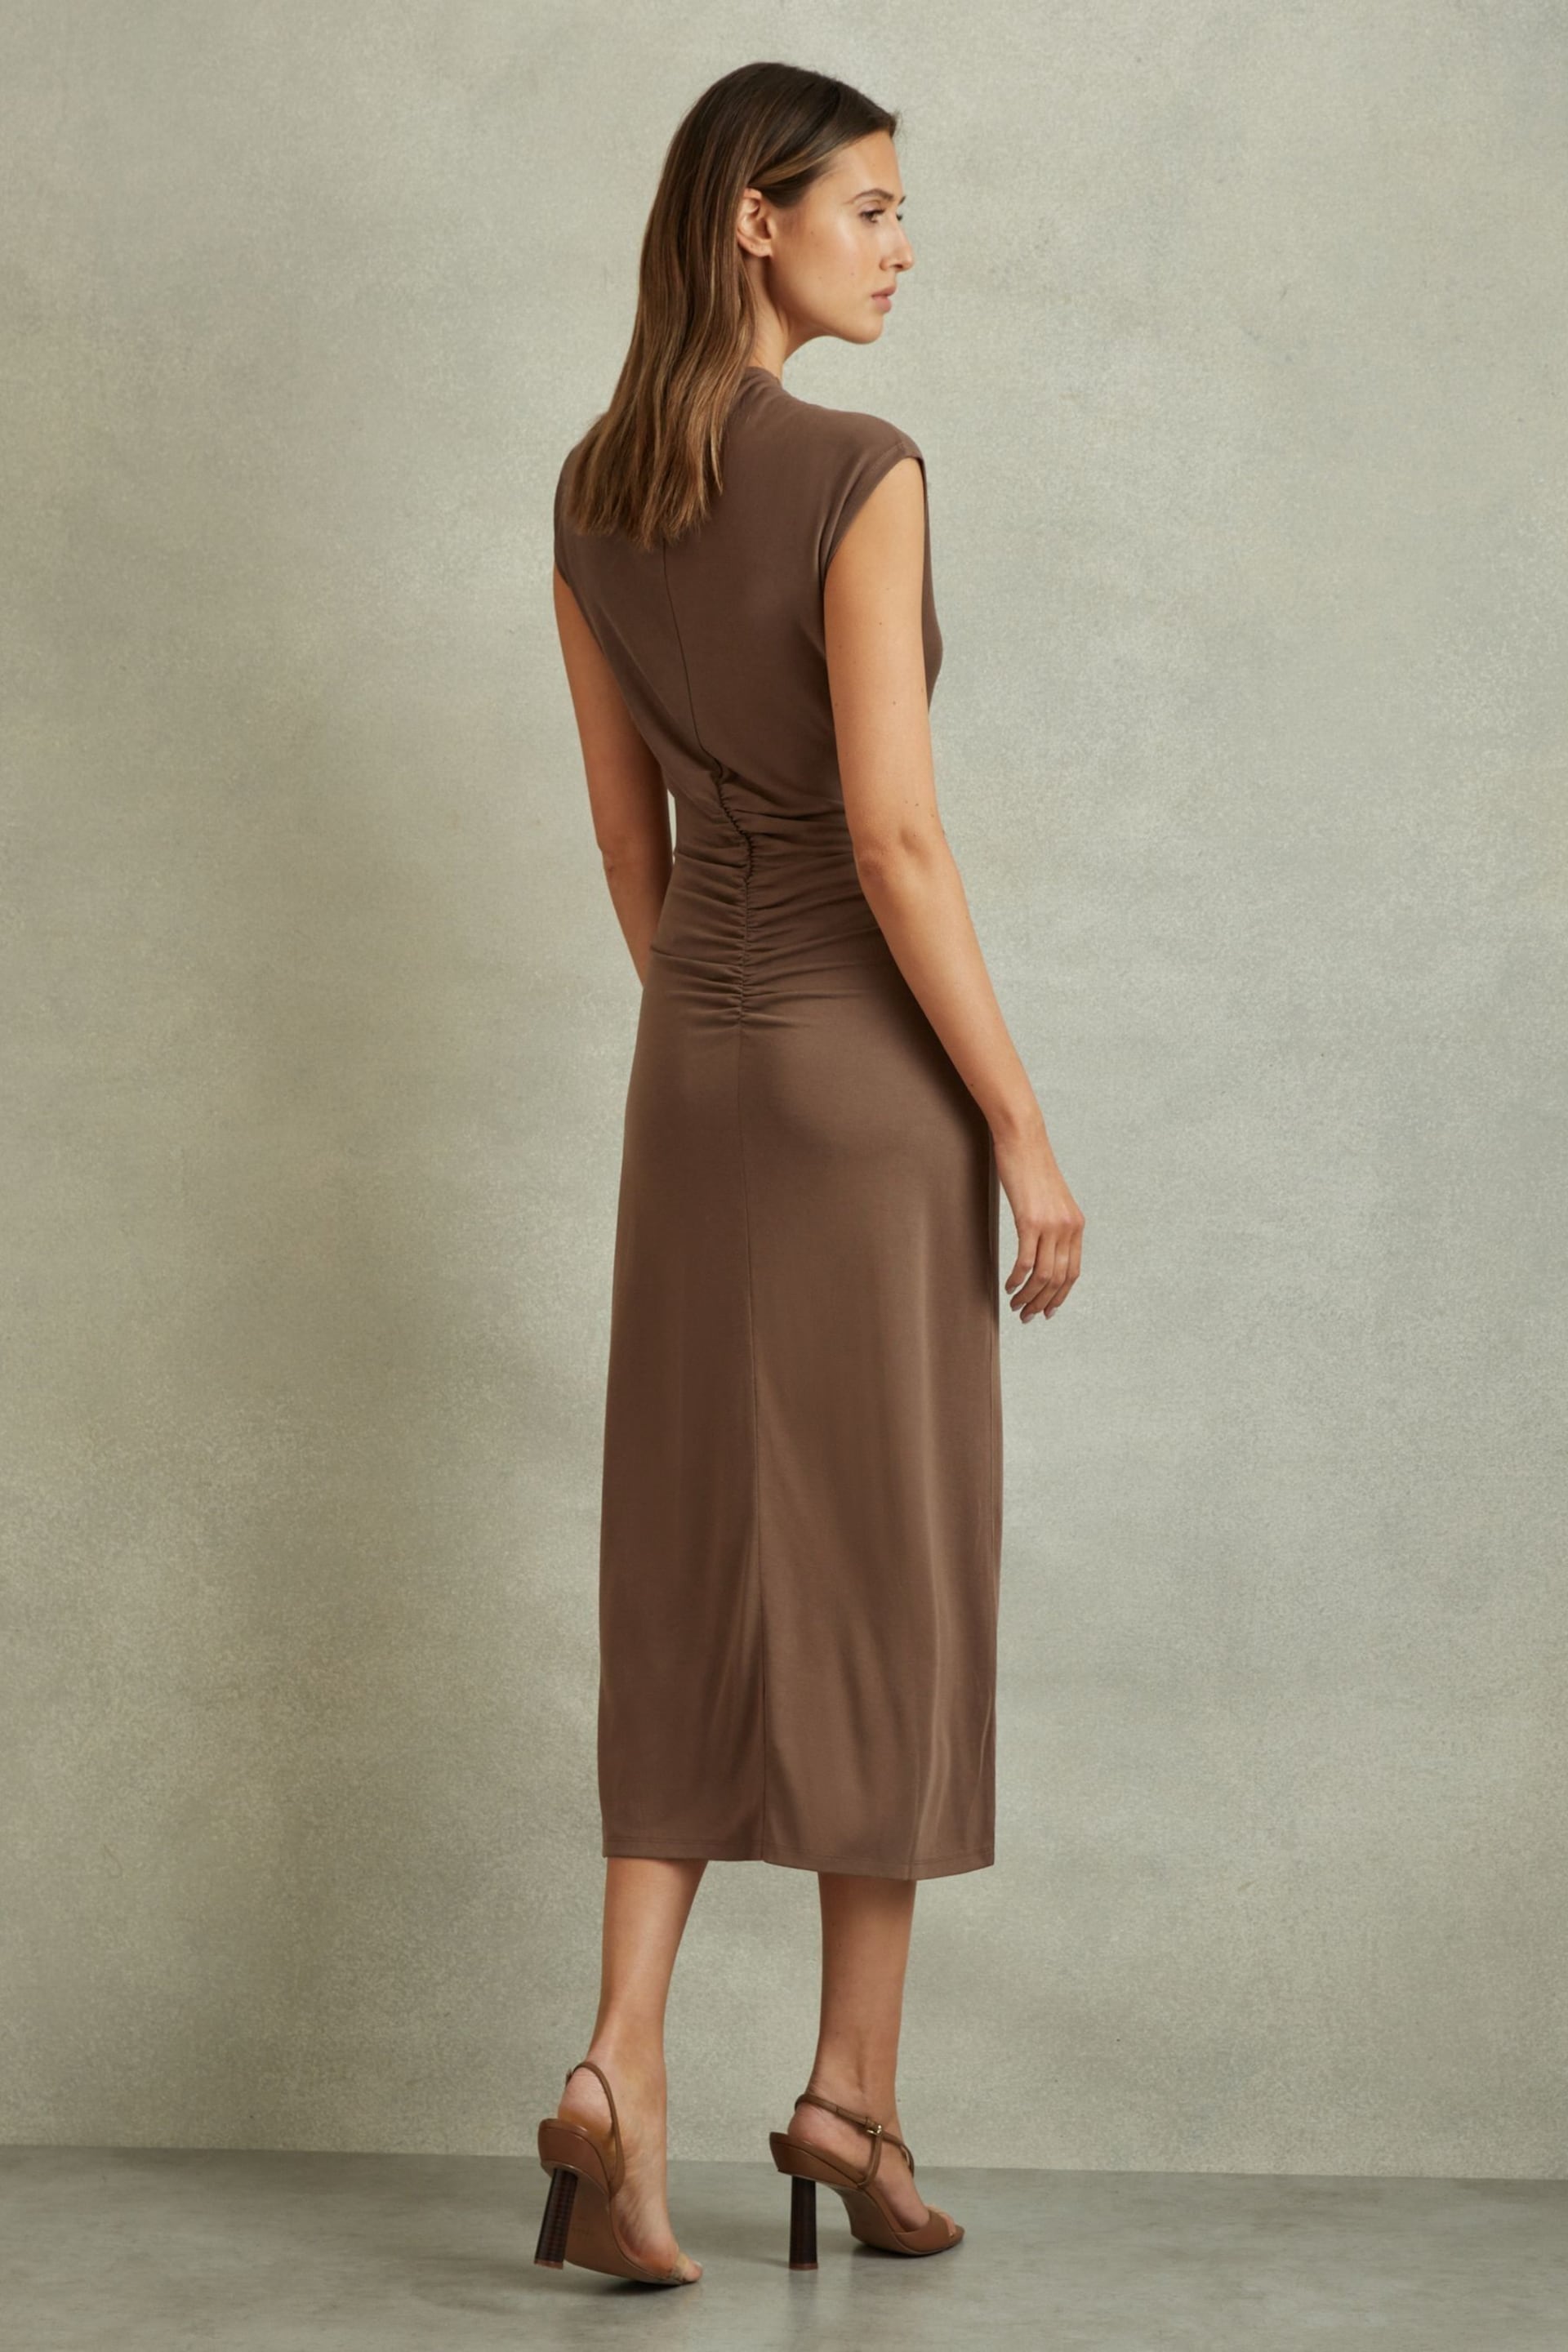 Reiss Chocolate Lenara Ruche Front Capped Sleeve Jersey Midi Dress - Image 5 of 6